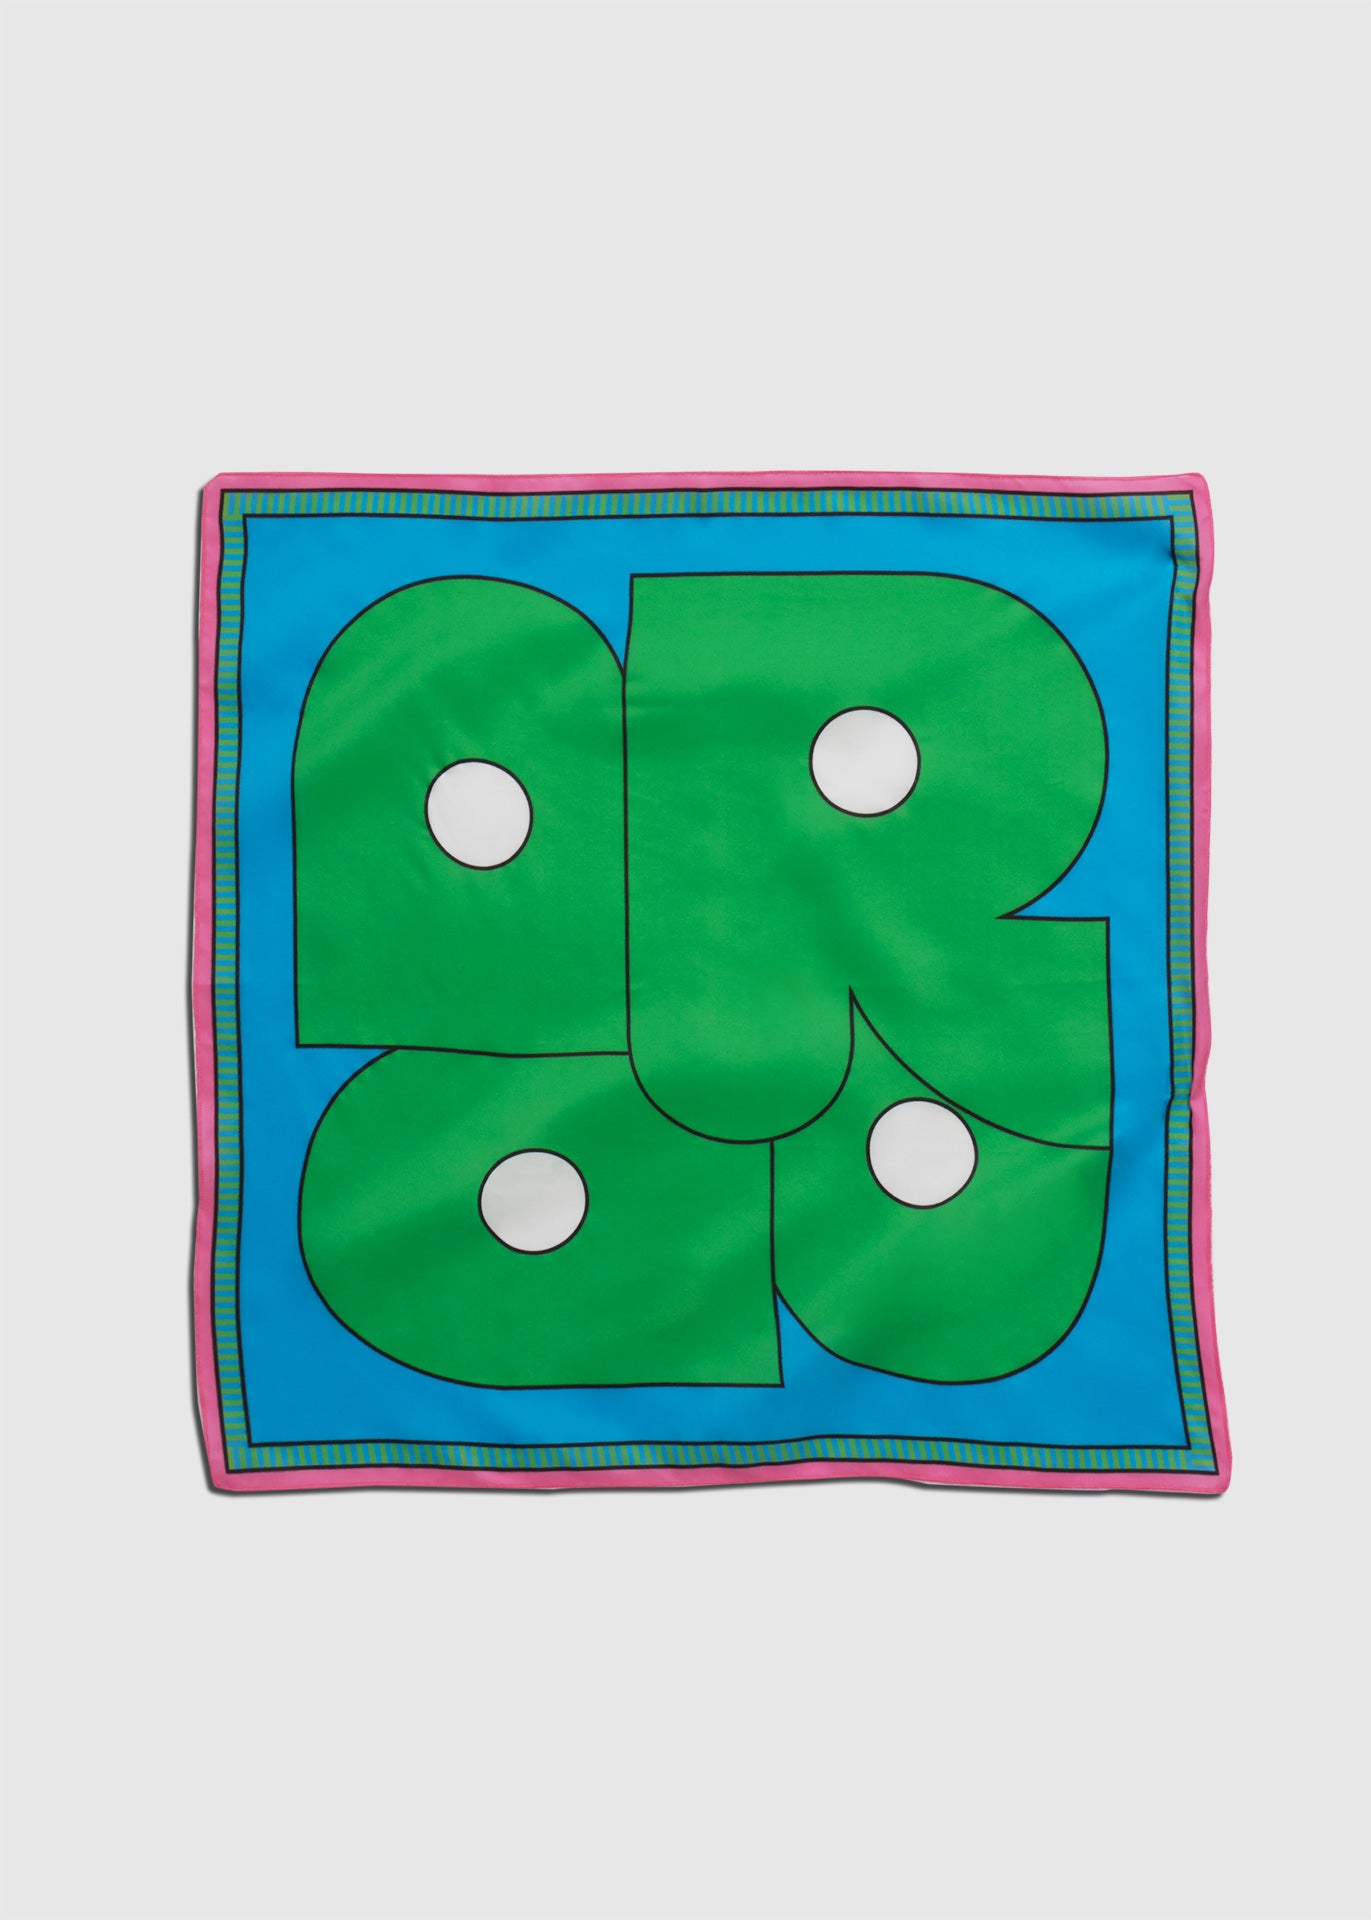 The green and blue silk square